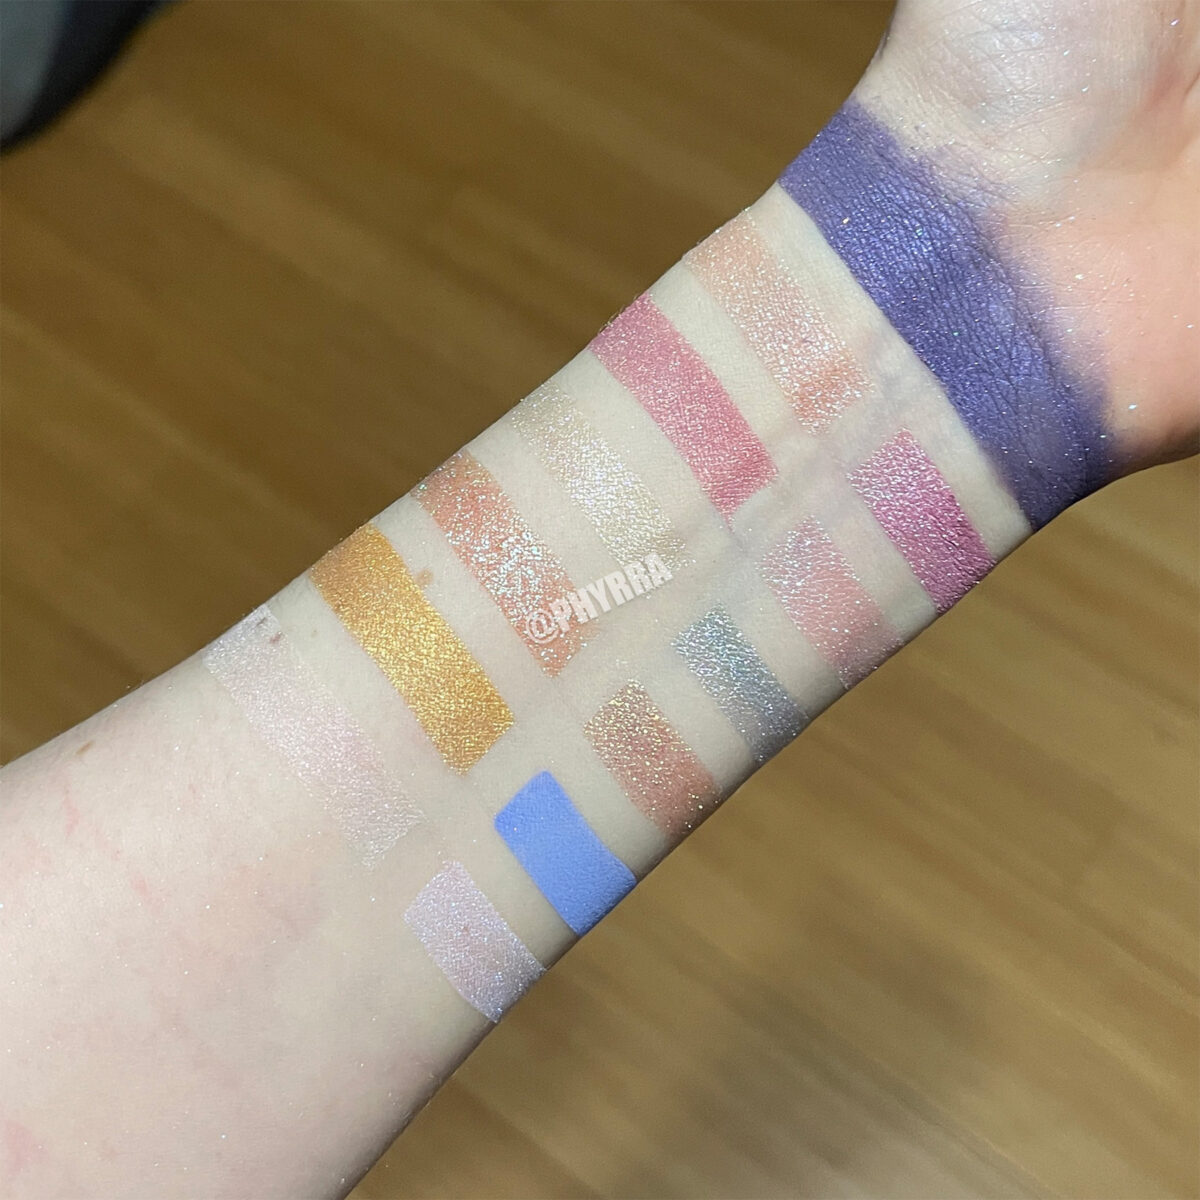 Aromaleigh eyeshadows swatched on pale skin